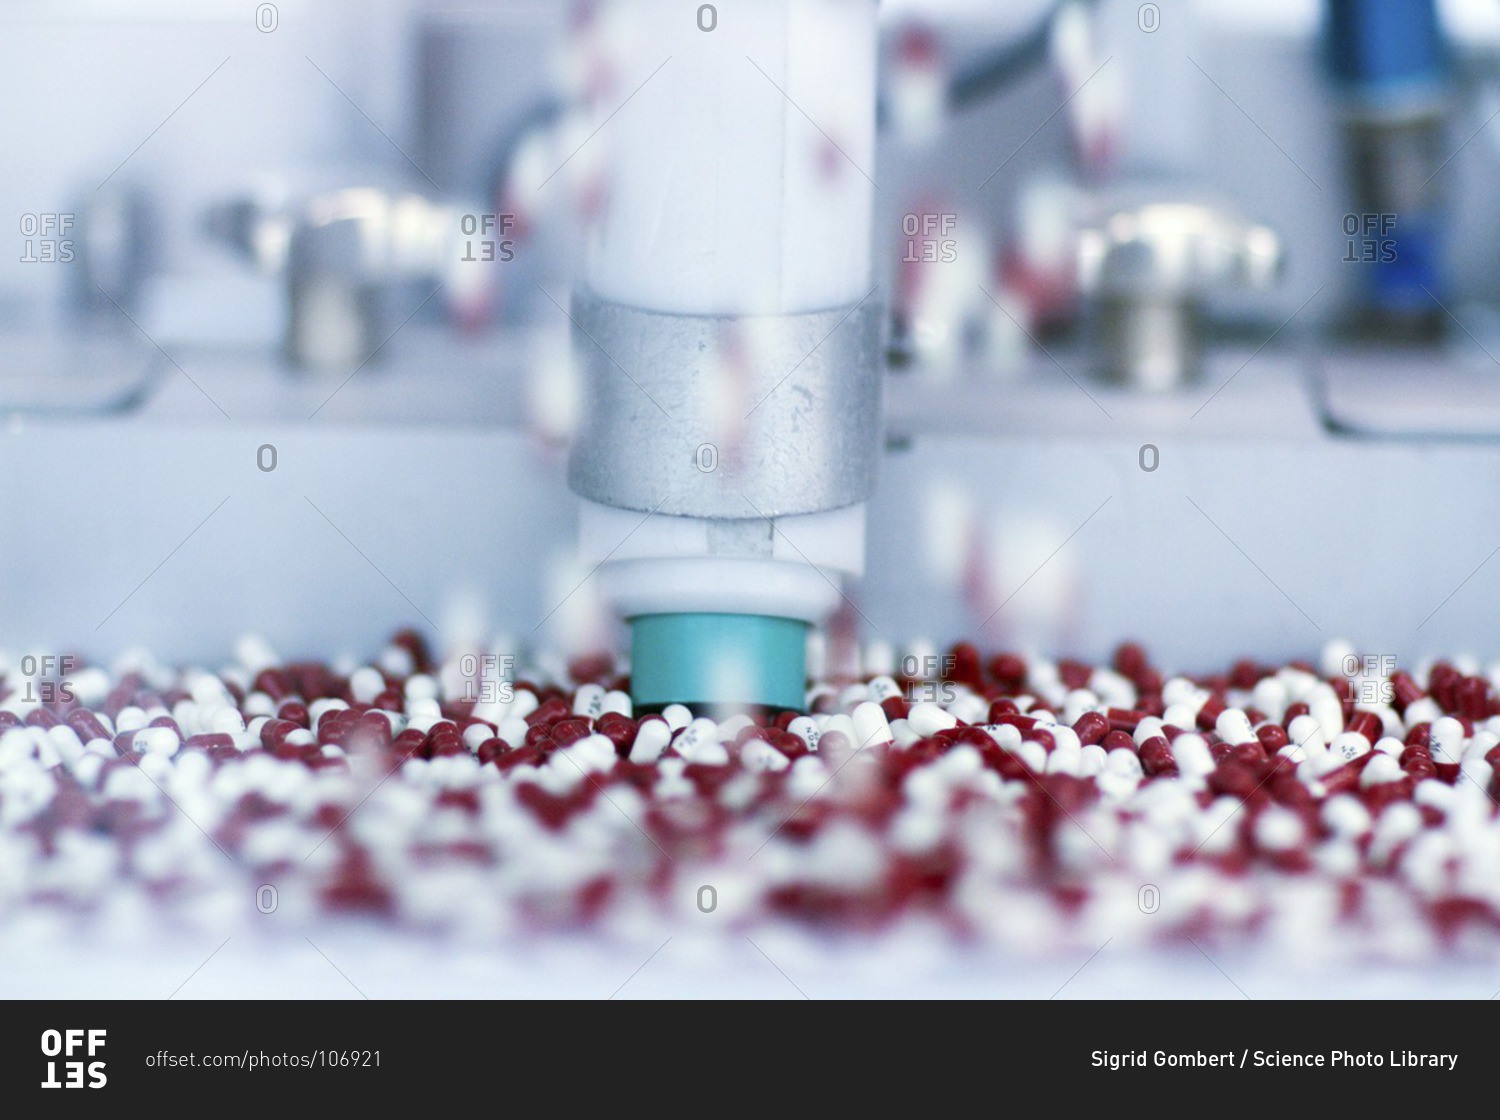 Drugs being produced at a pharmaceutical production plant